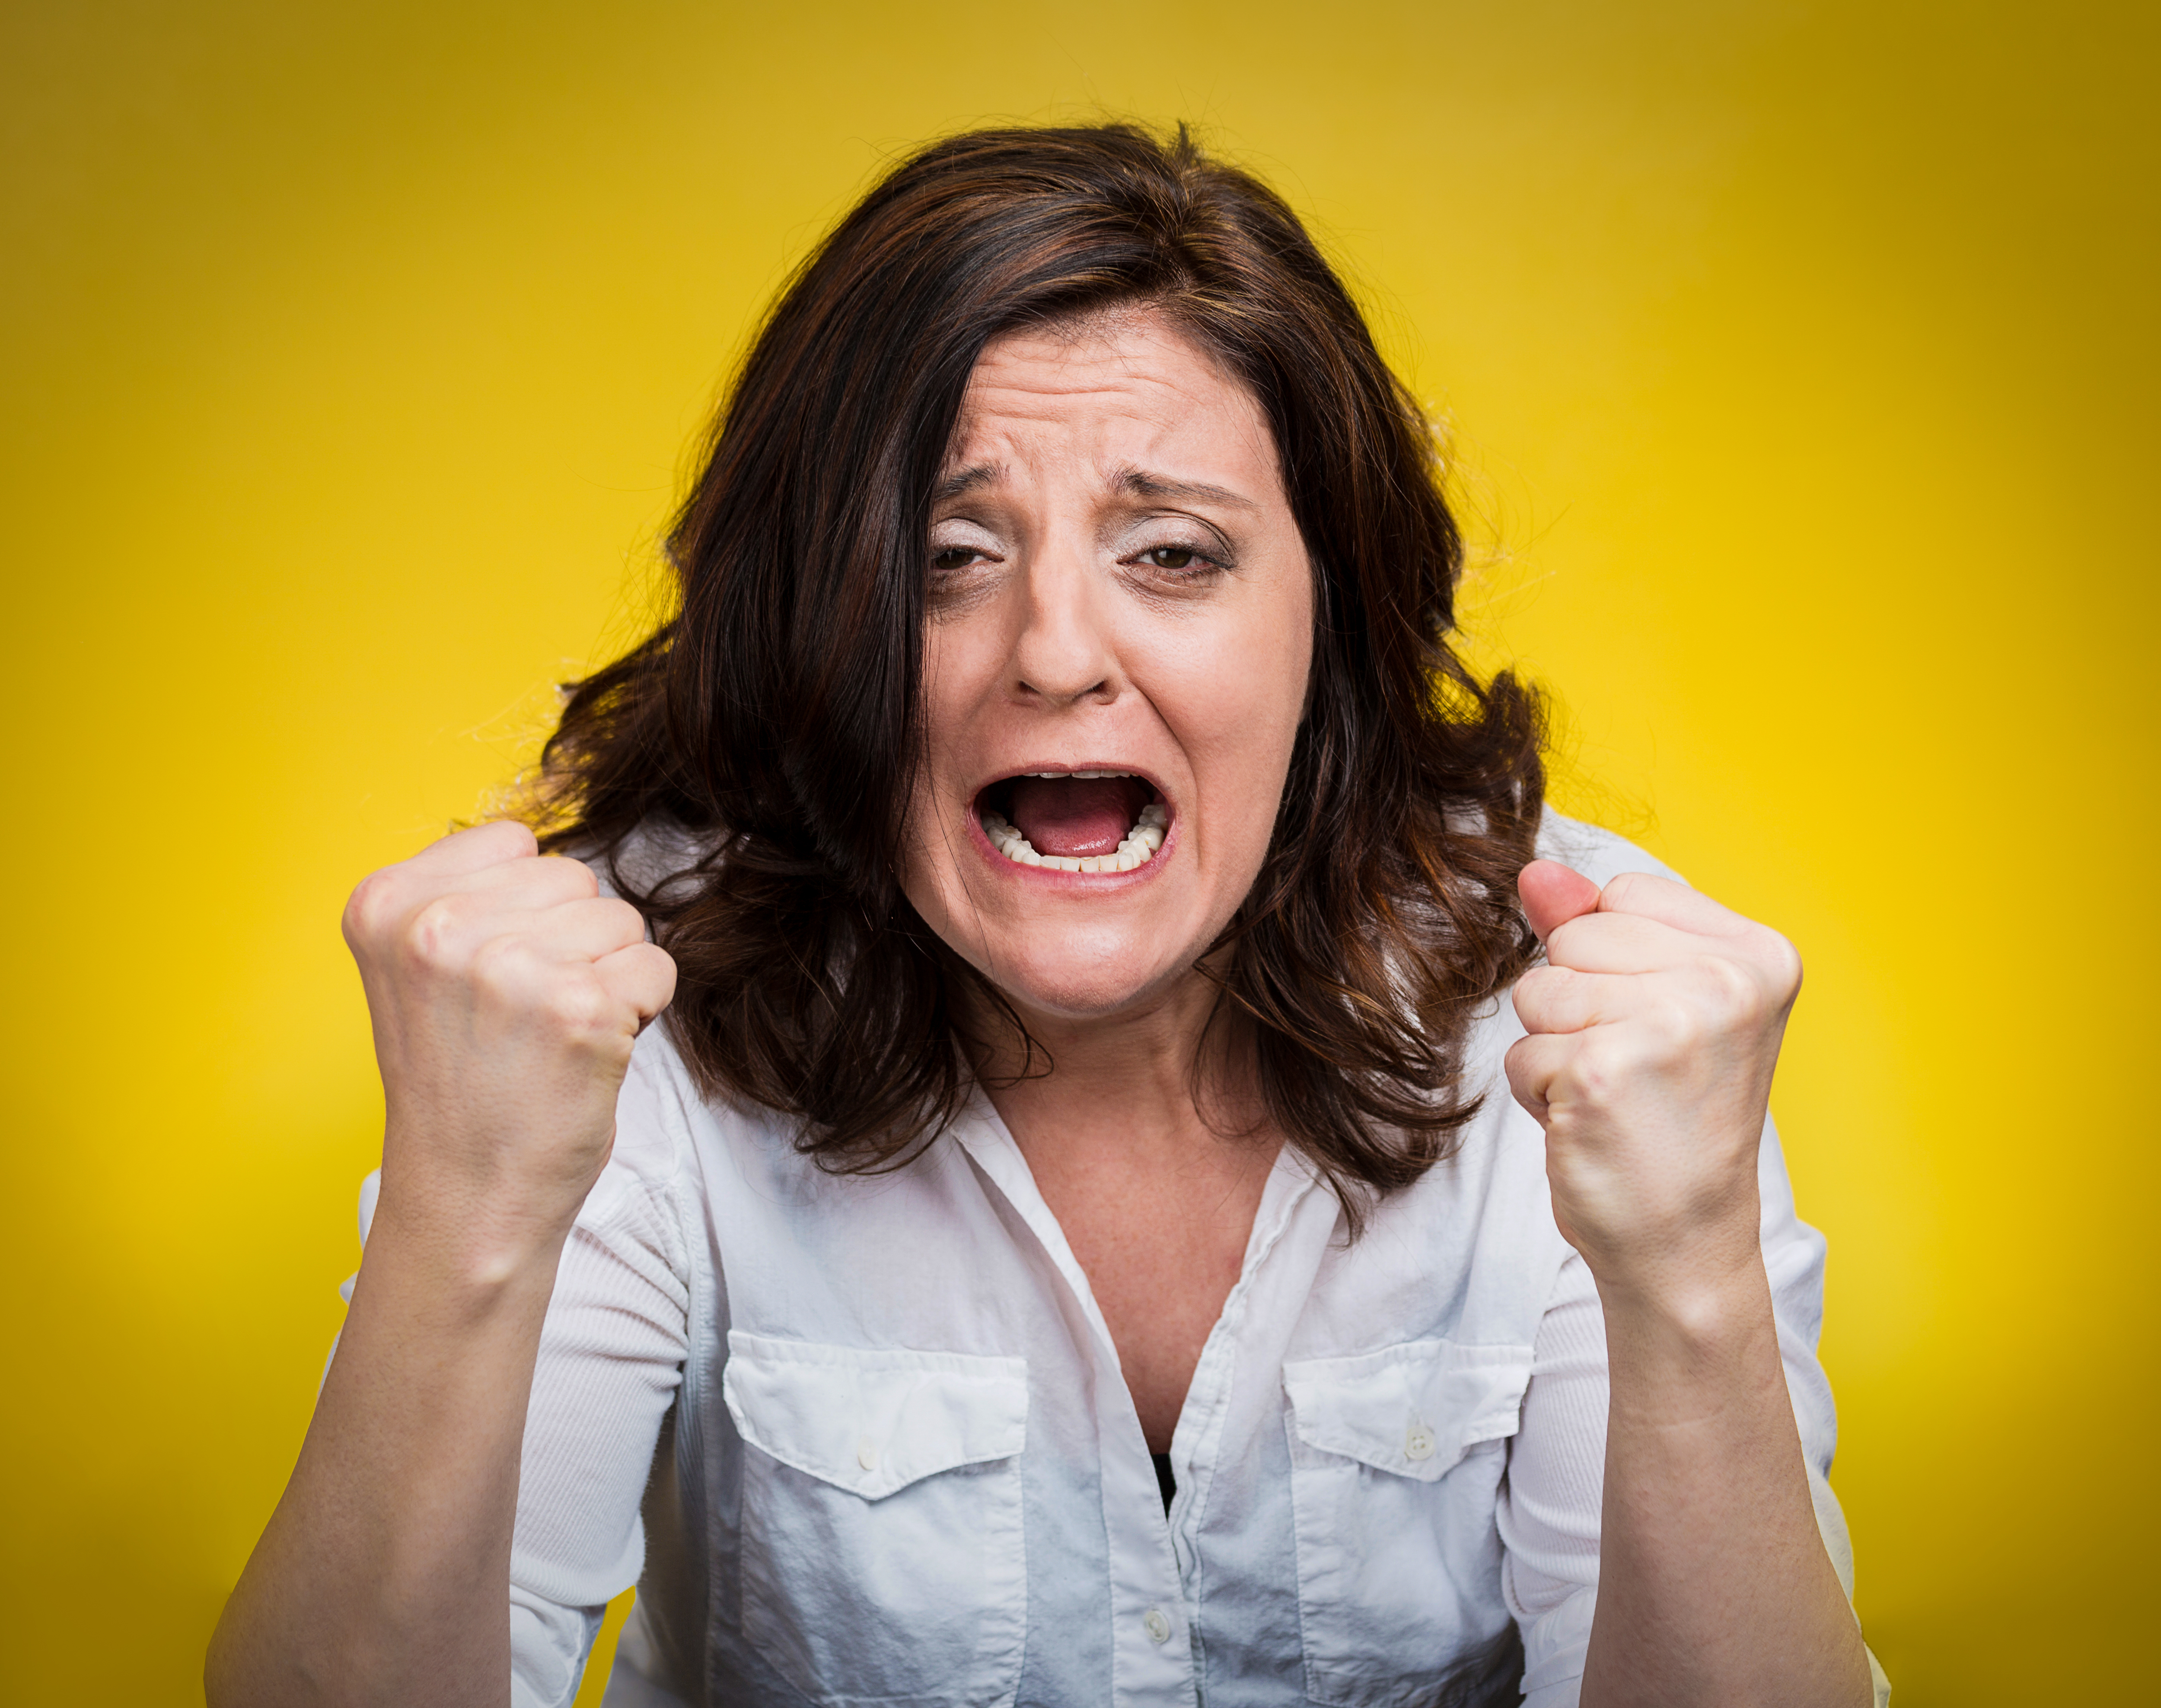 An angry woman screaming | Source: Shutterstock